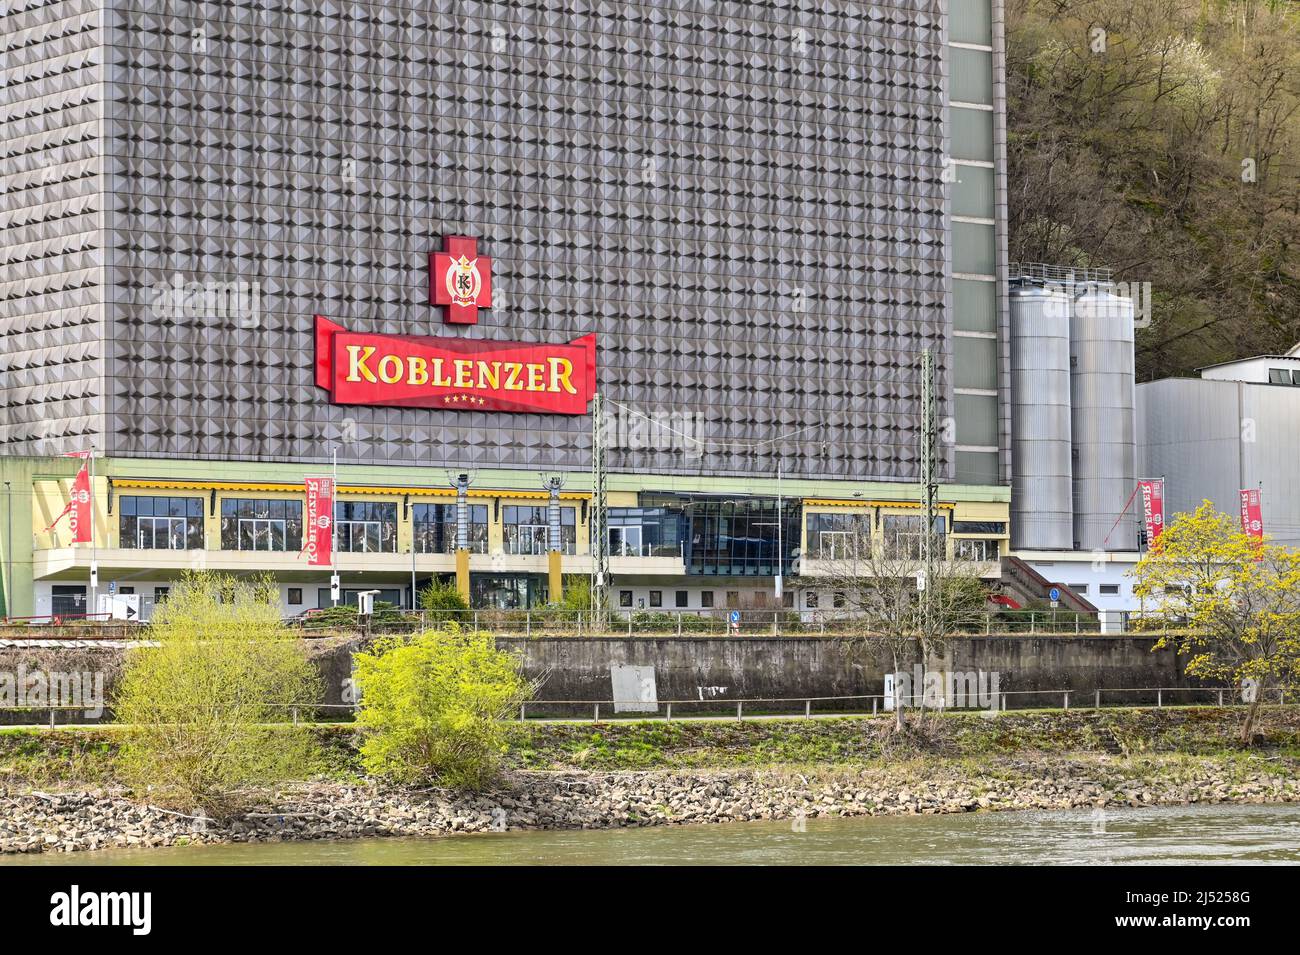 Koblenz, Germany - April 2020: Exterior of the Koblenzer Brauerei brewery on the banks of the River Rhine on the outskirts of the city. Stock Photo